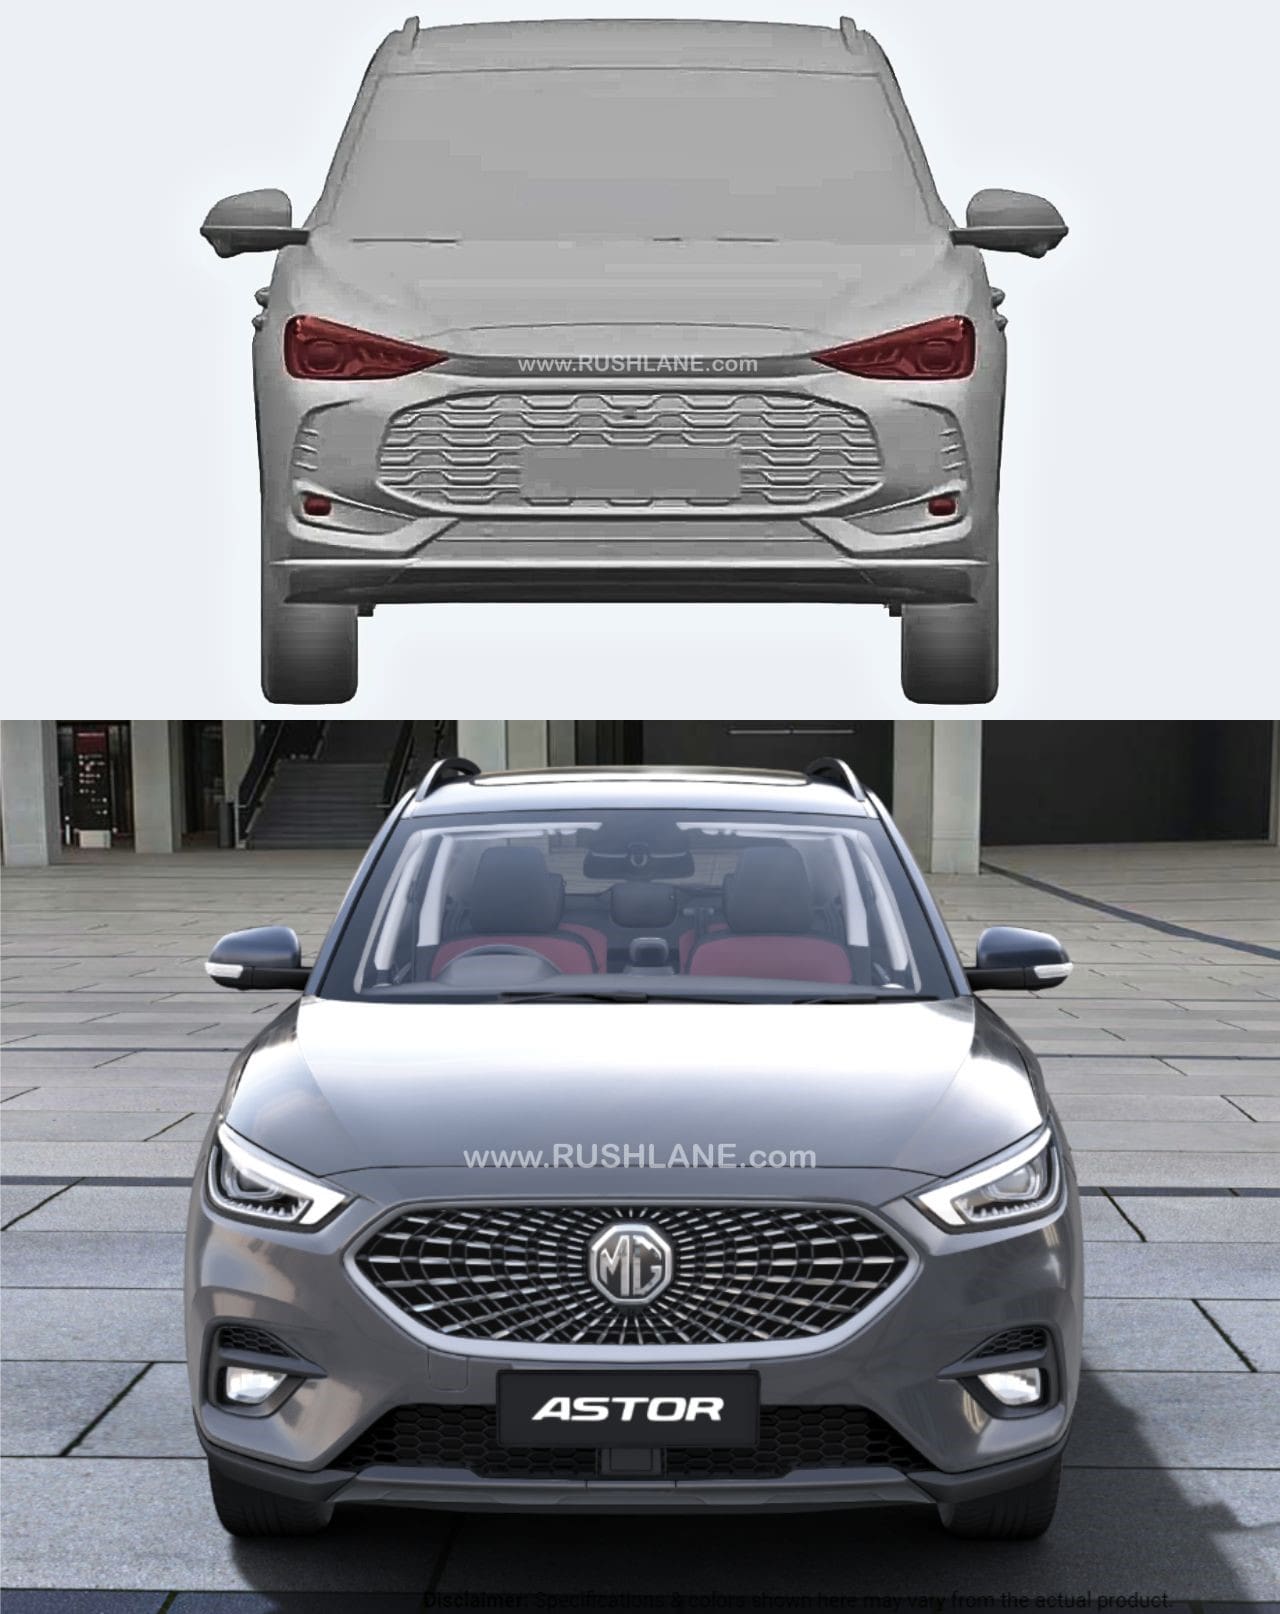 New MG ZS Astor Leaked Vs Current Astor